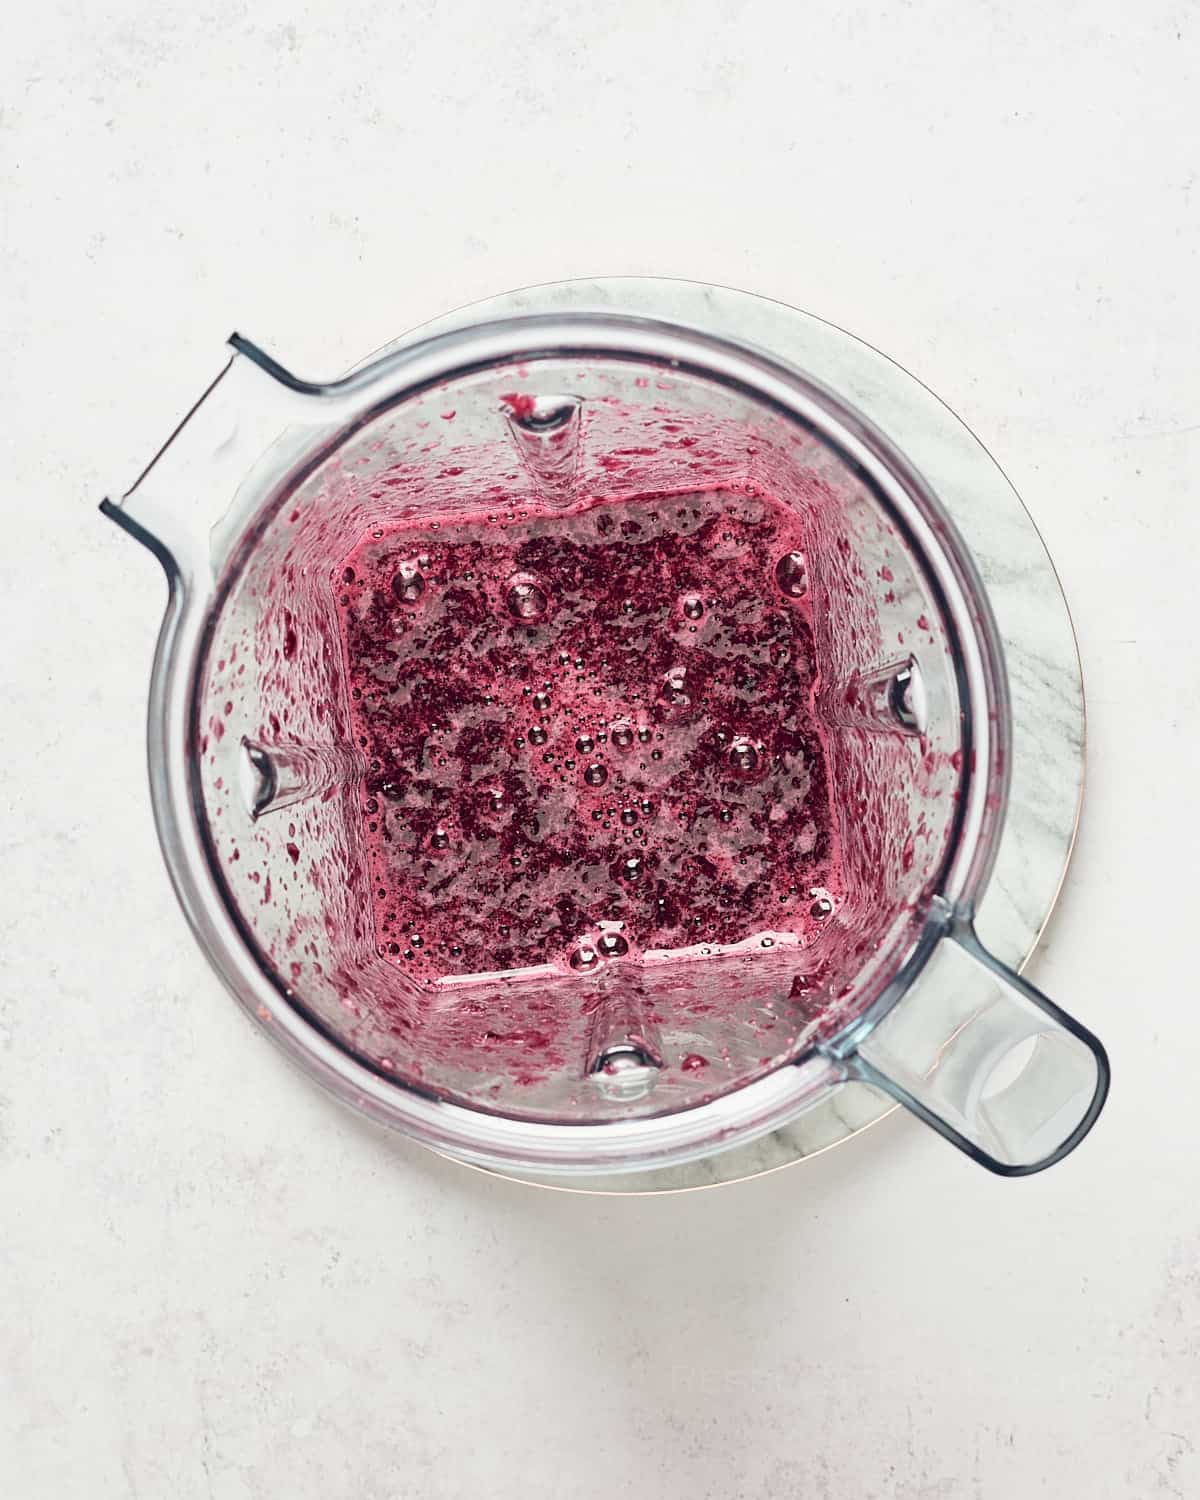 Top down view of cherry compote in blender.